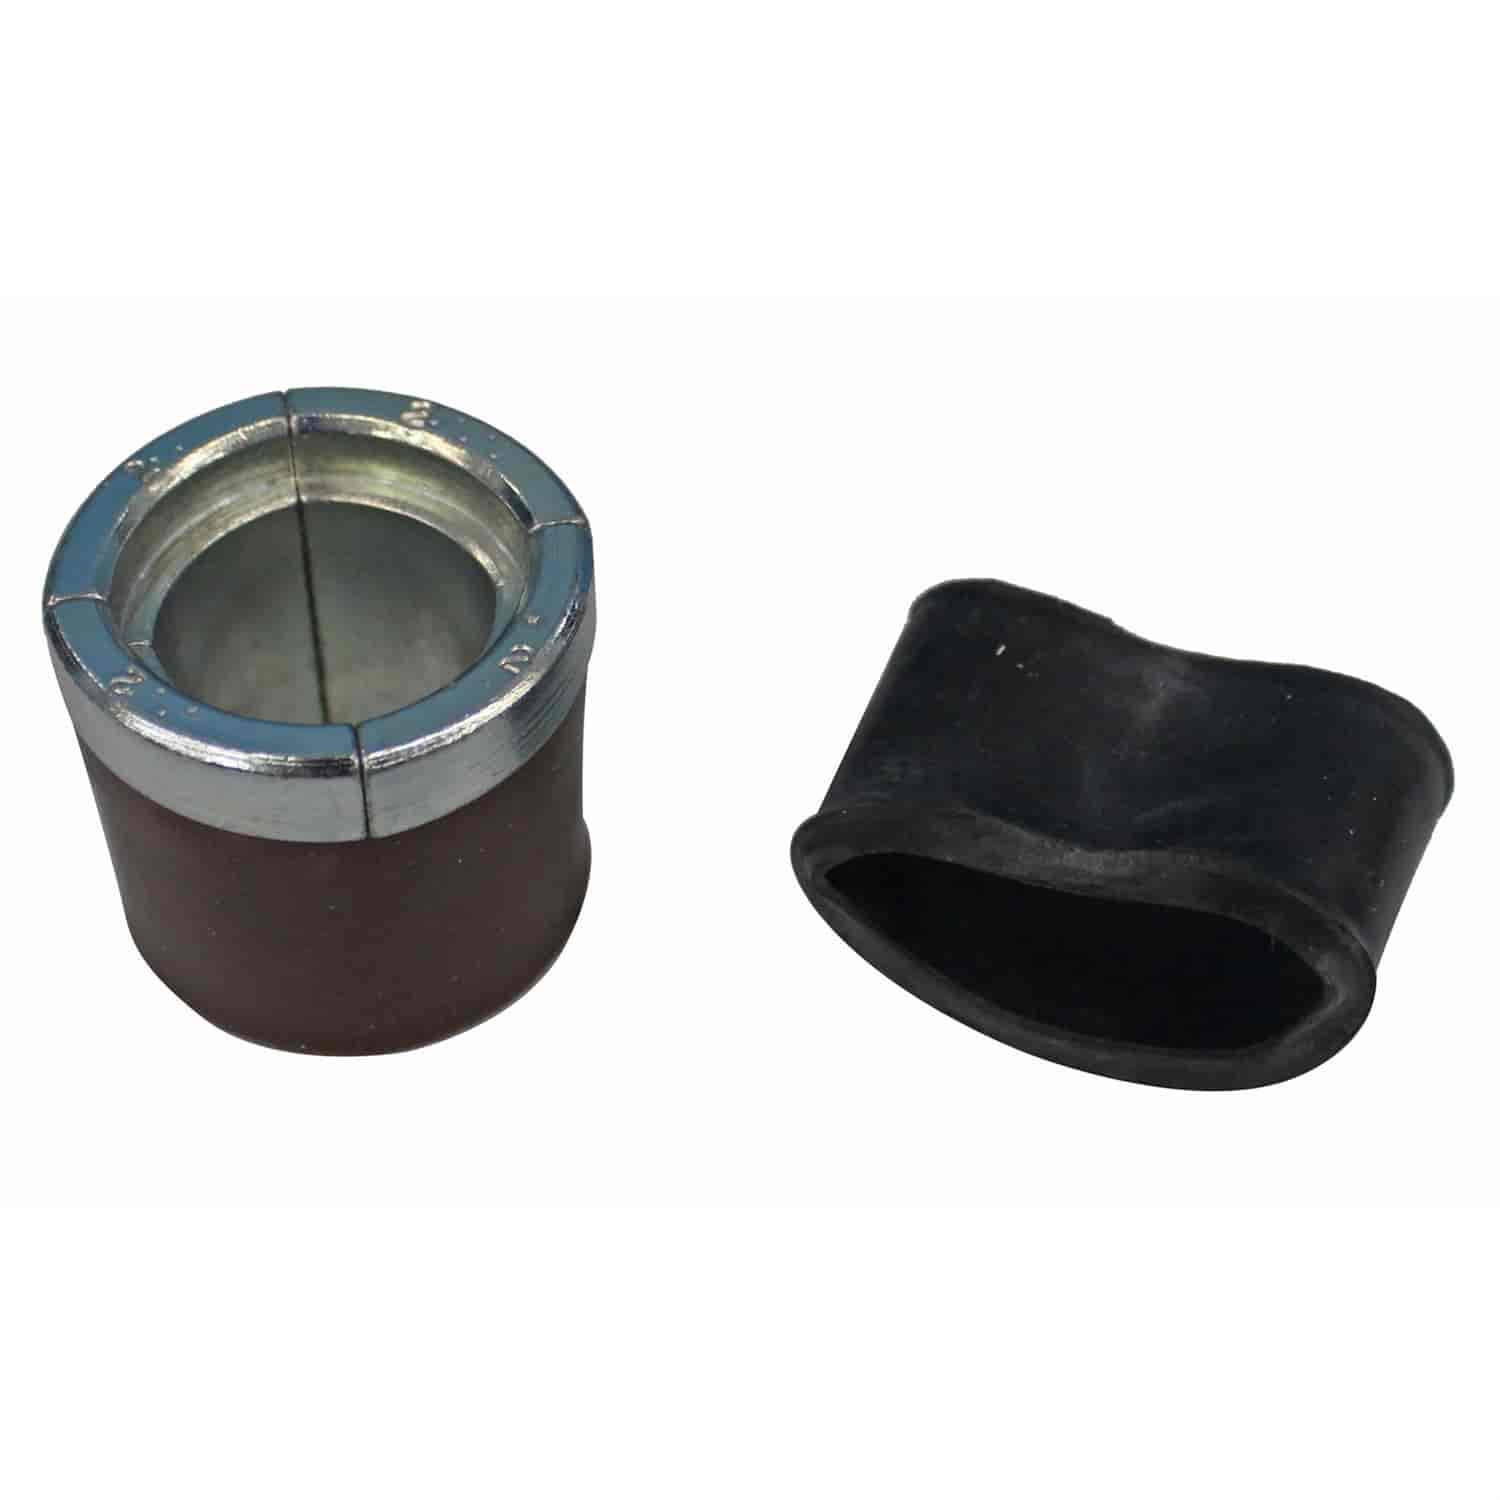 Expander Collet Bearing ID: 2.375" - 2.690"